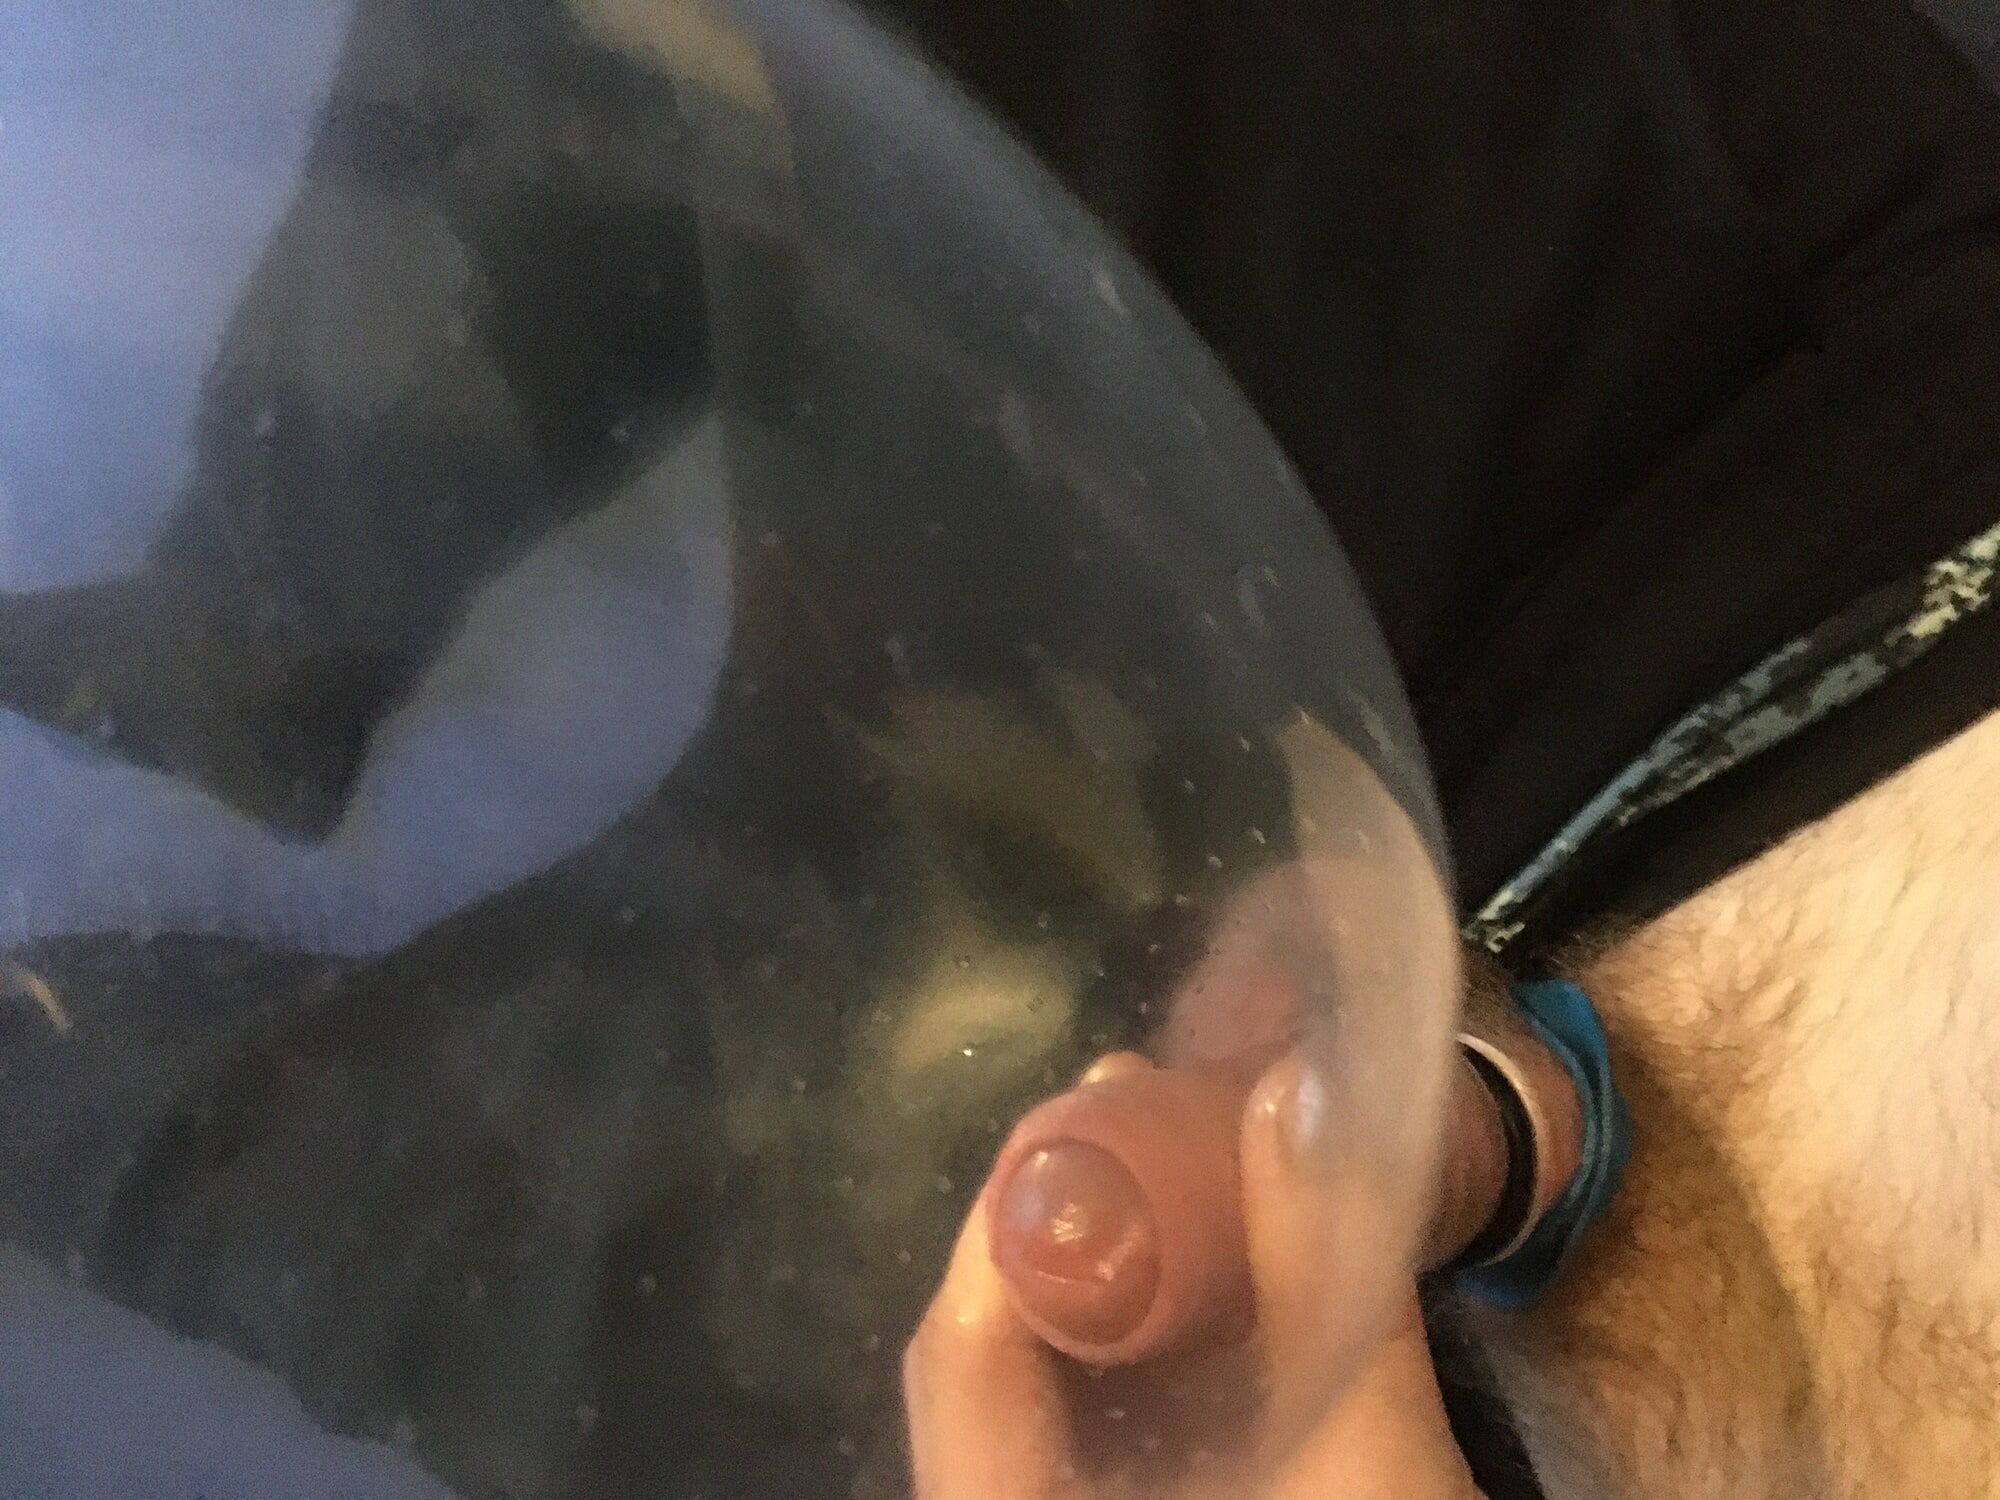  Haired Dick And Balls With Rubber Bands Condom Ballon  fuck #57